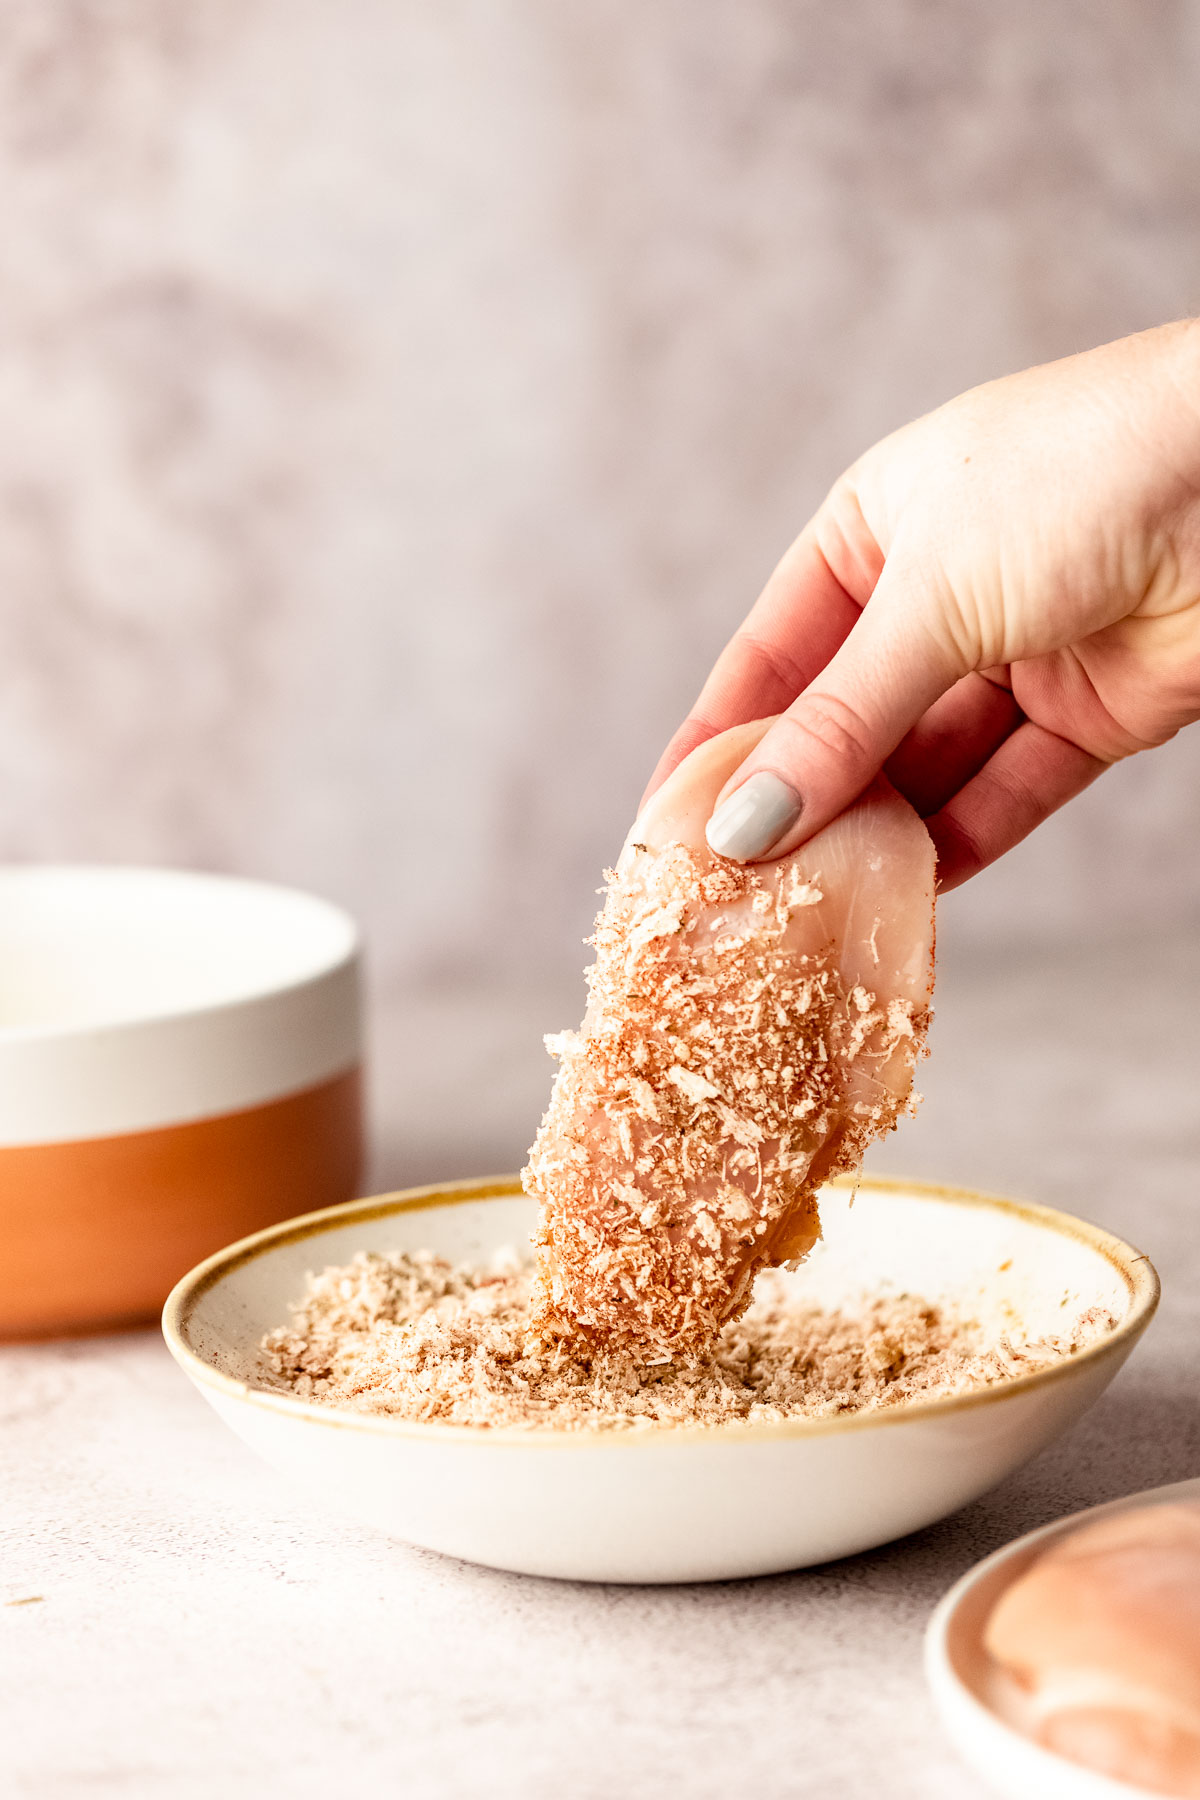 A chicken breast being coated with panko crumbs and parmesan